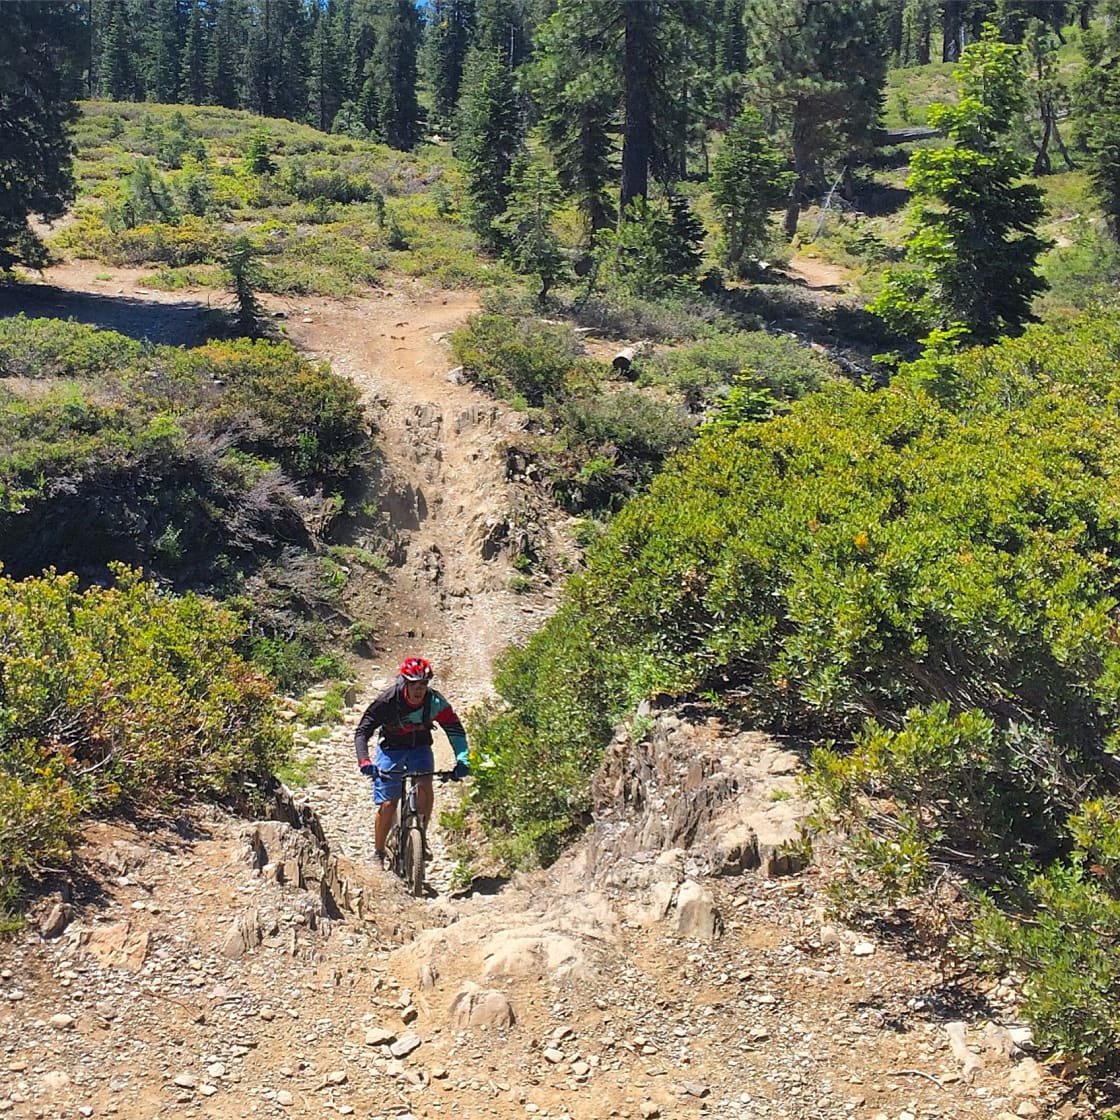 Nearby mountain biking - check out Downieville if camping at Ramshorn!